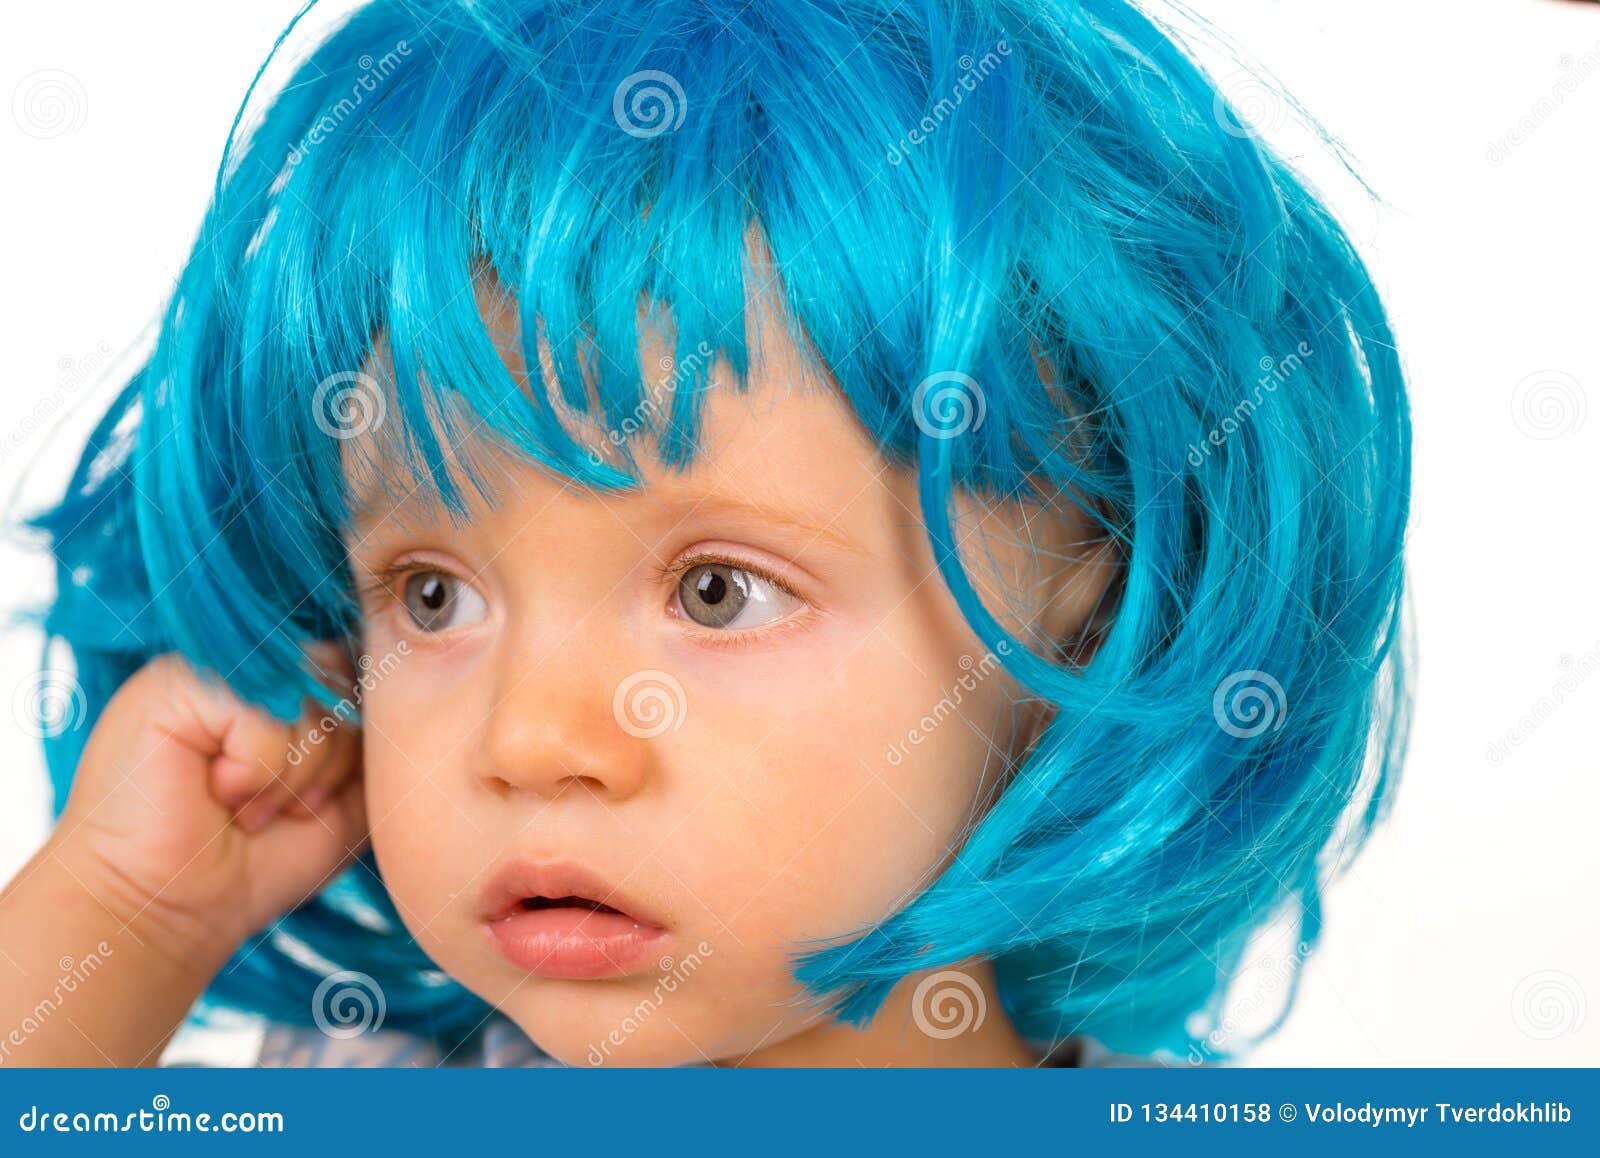 baby with blue hair